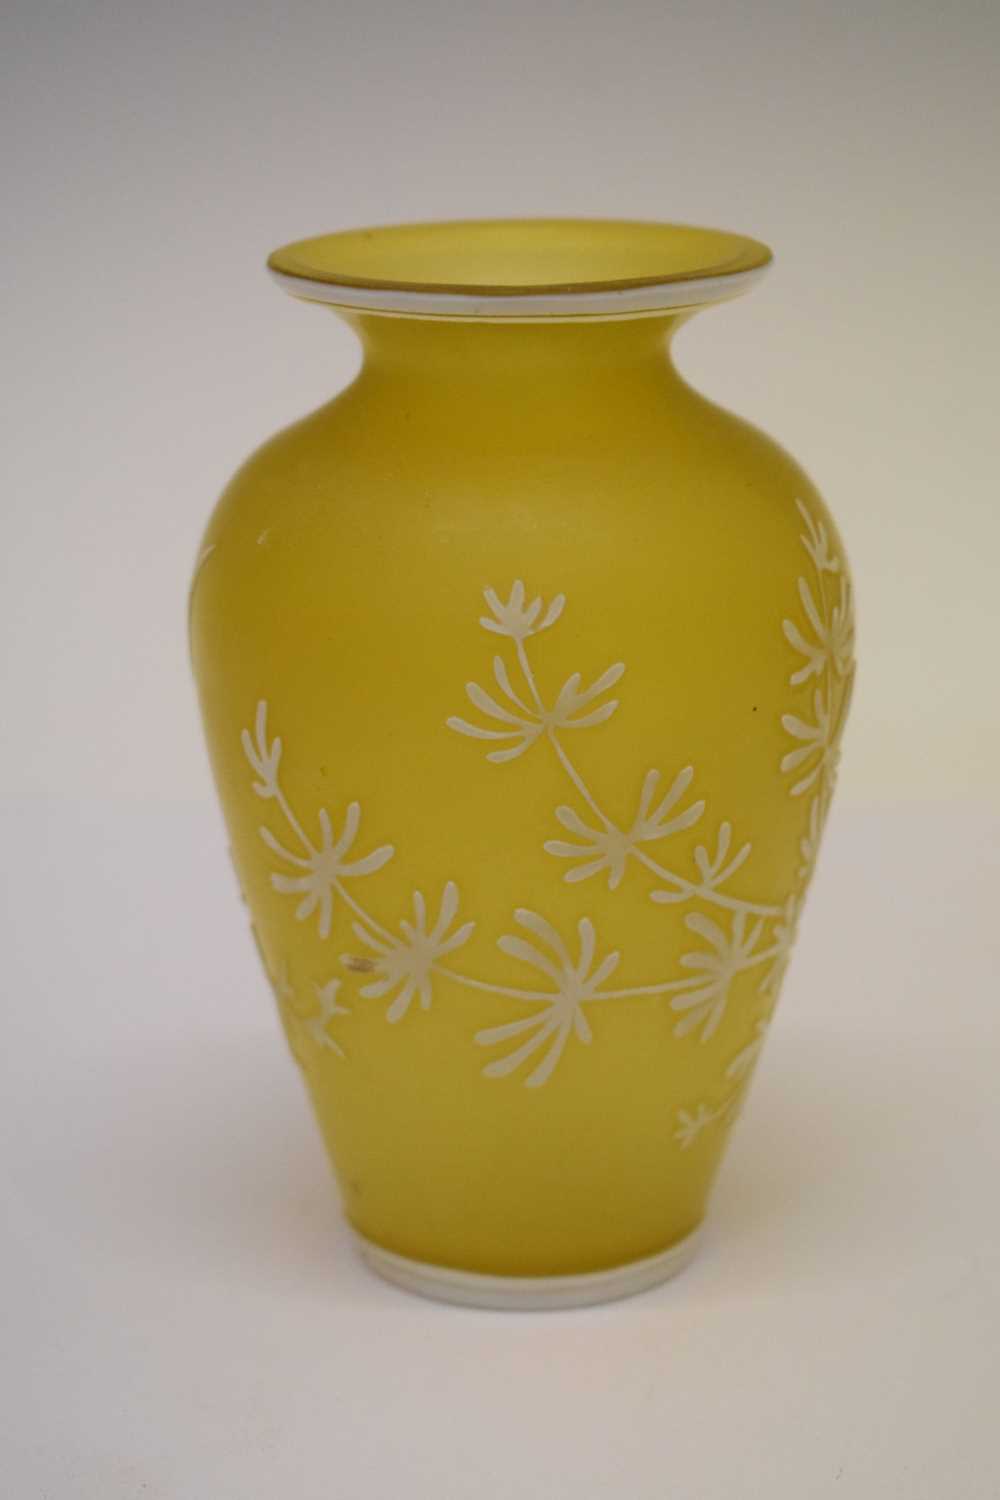 Galle style cameo glass vase with floral decoration - Image 3 of 6